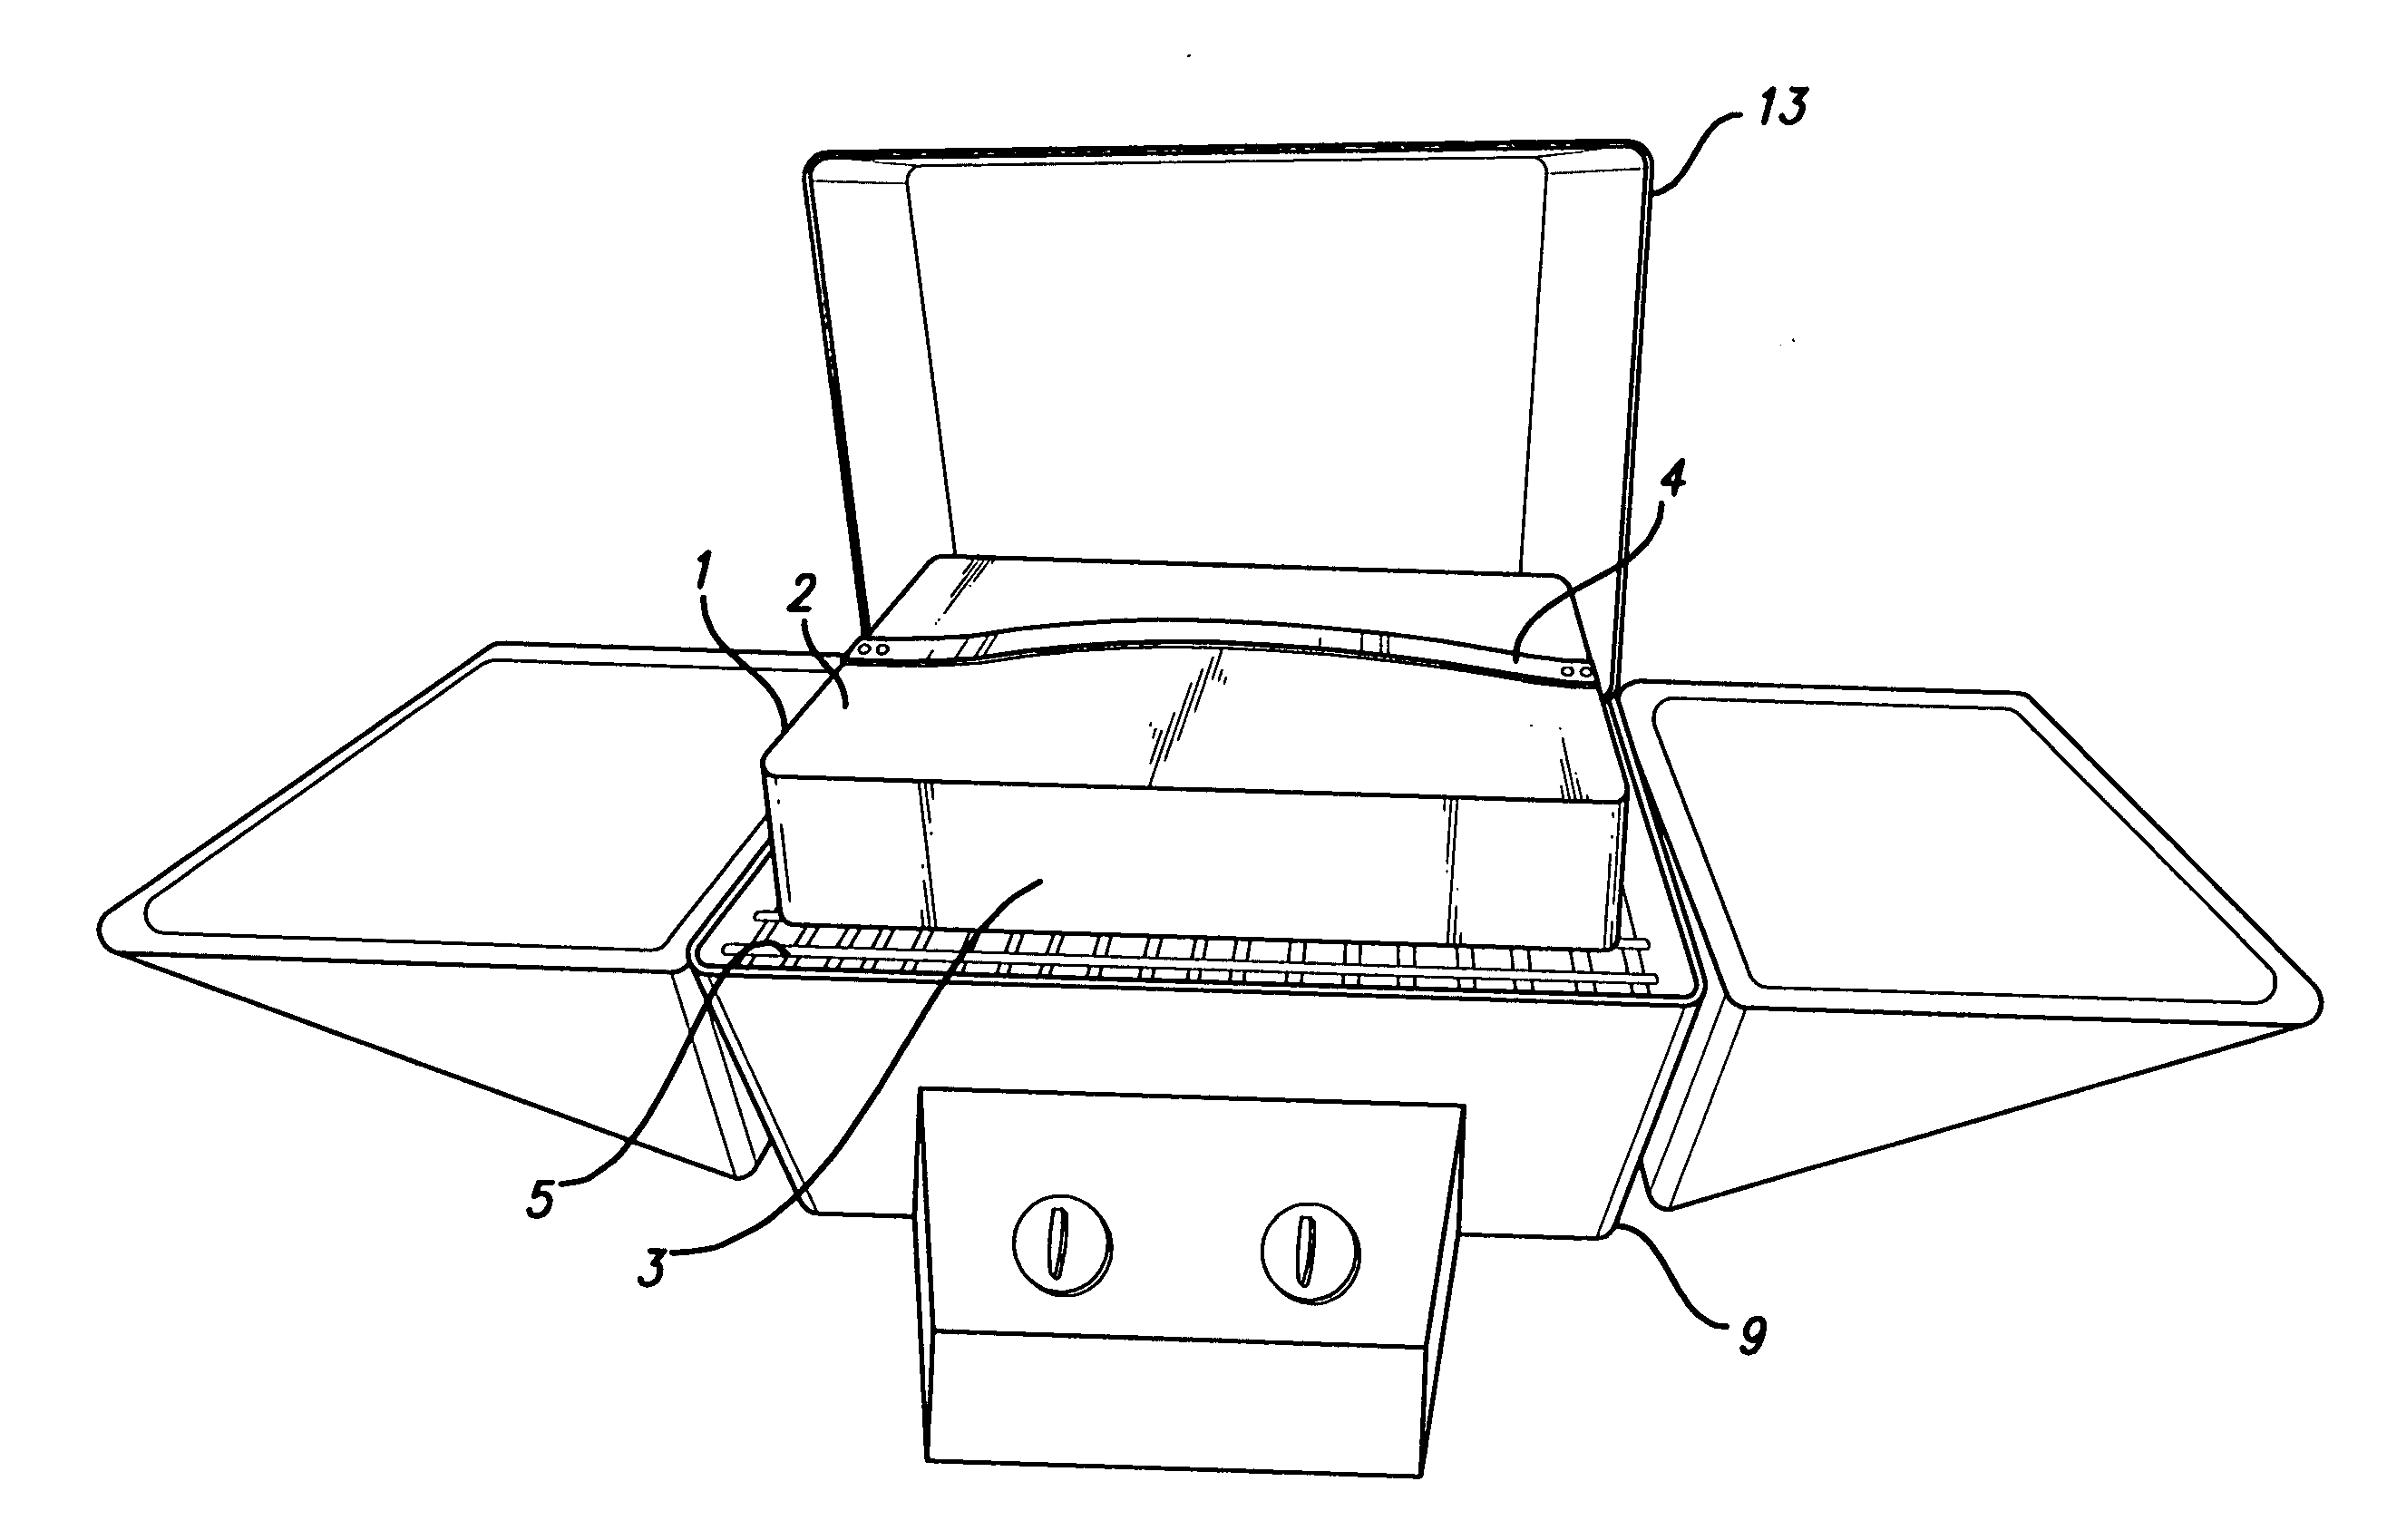 Insulated cover and method for cooking pizza and similar food items on a home gas or charcoal grill